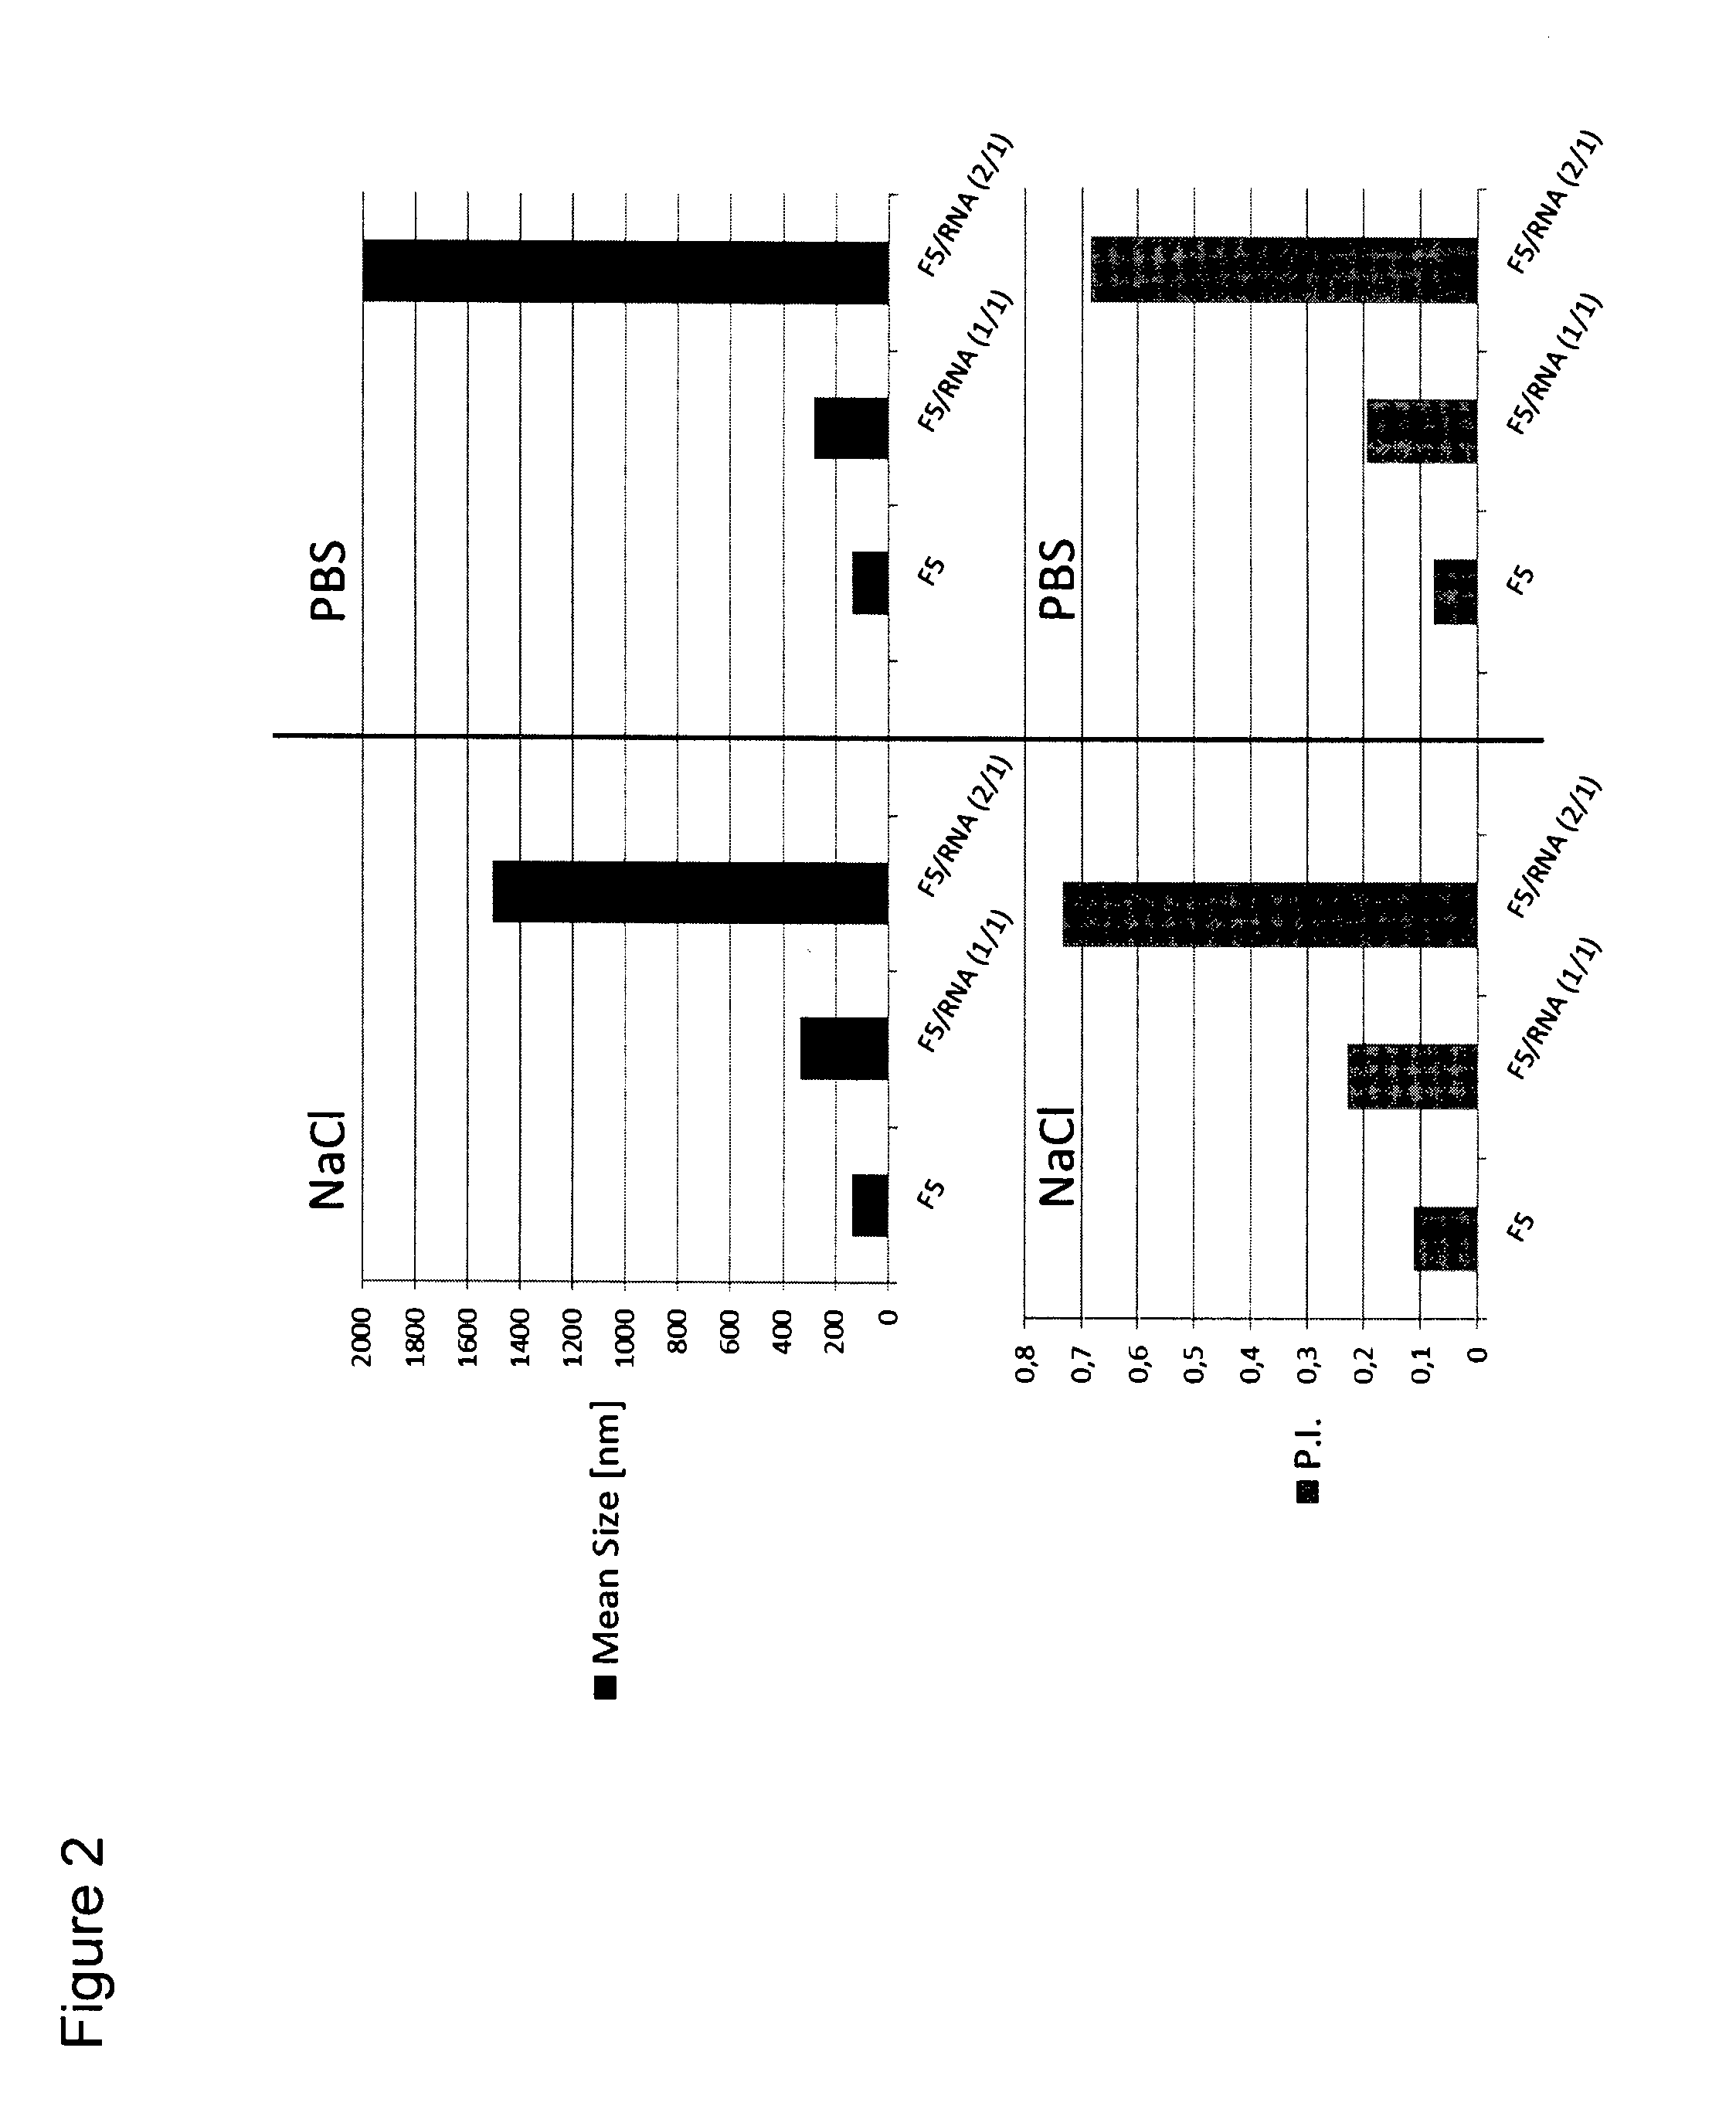 RNA Formulation for Immunotherapy